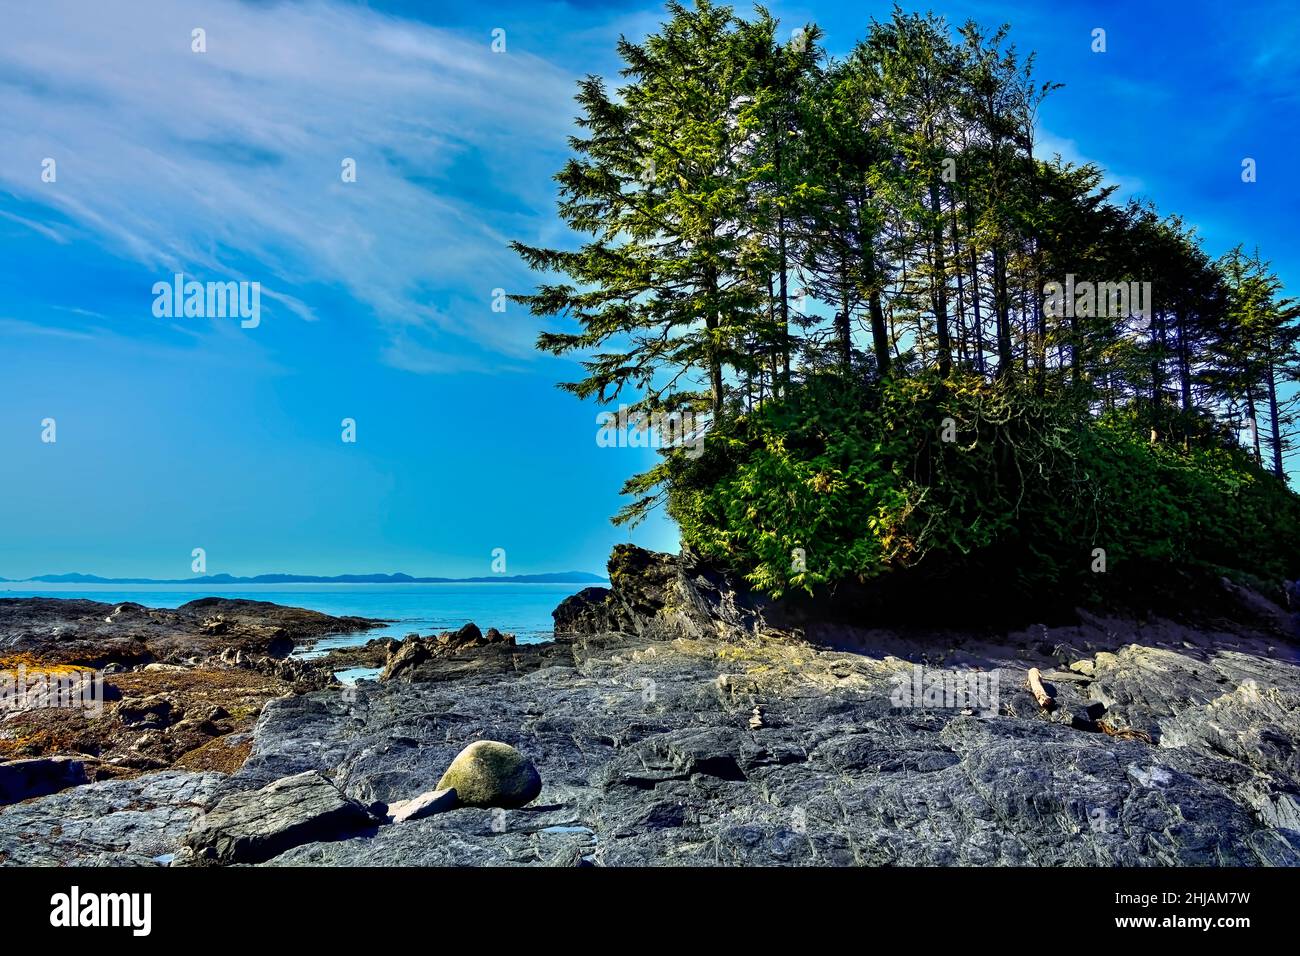 A landscape image of the rugged west coast of Vancouver Island looking outward toward the Pacific Ocean. Stock Photo